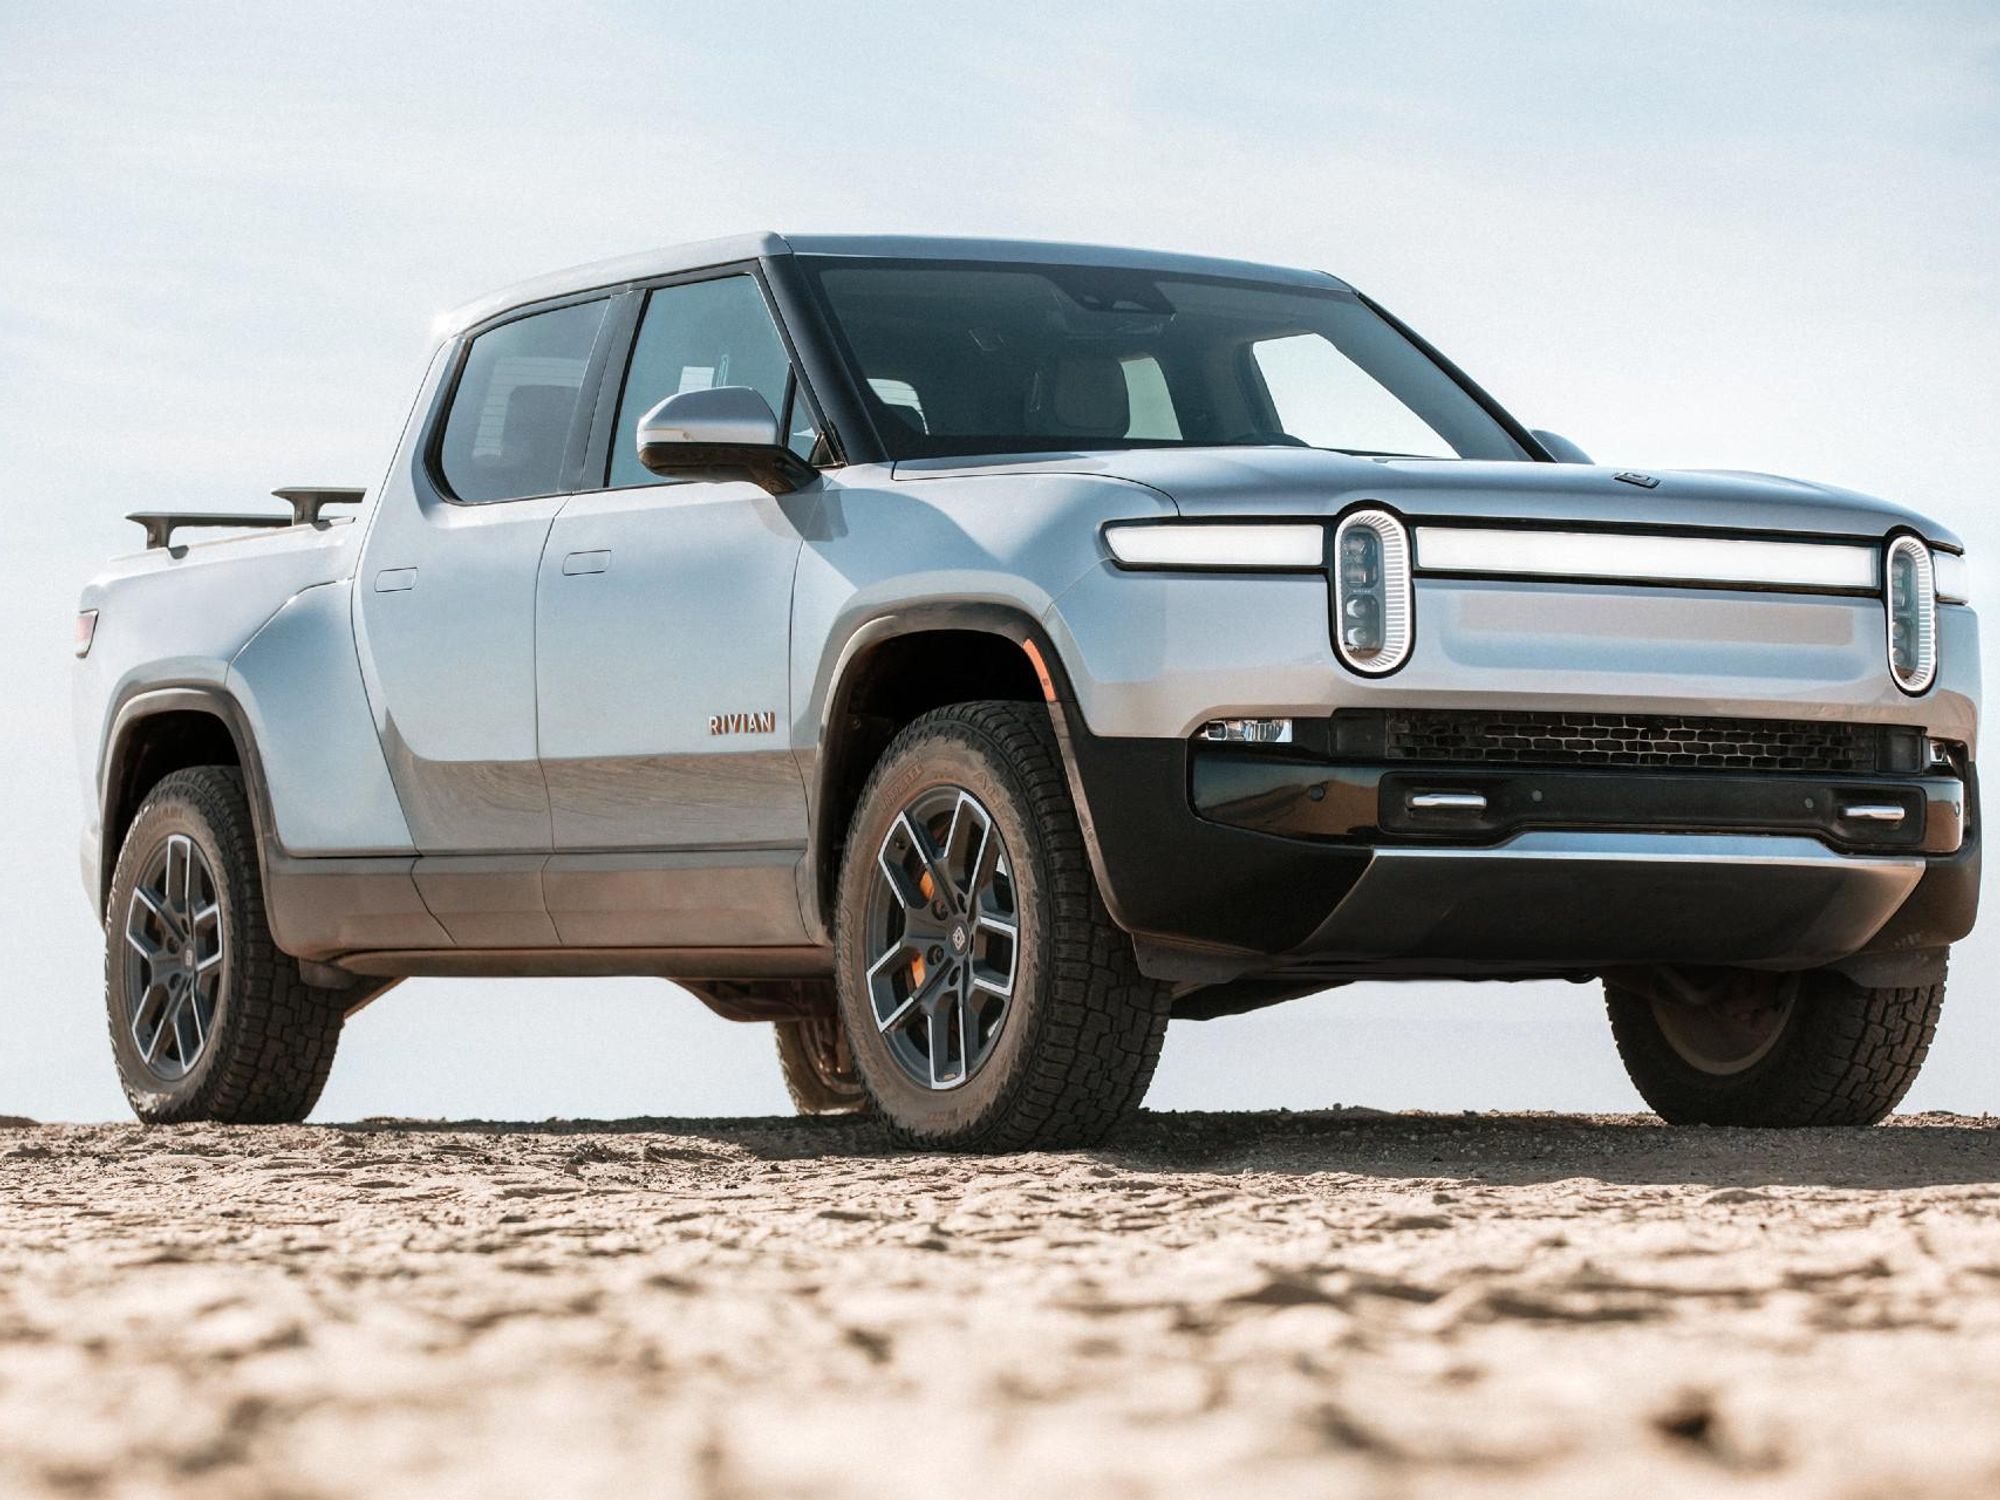 Rebuilding Trust with Customers: Rivian's Plan to Address Recent Delivery Issues and Increase Customer Satisfaction